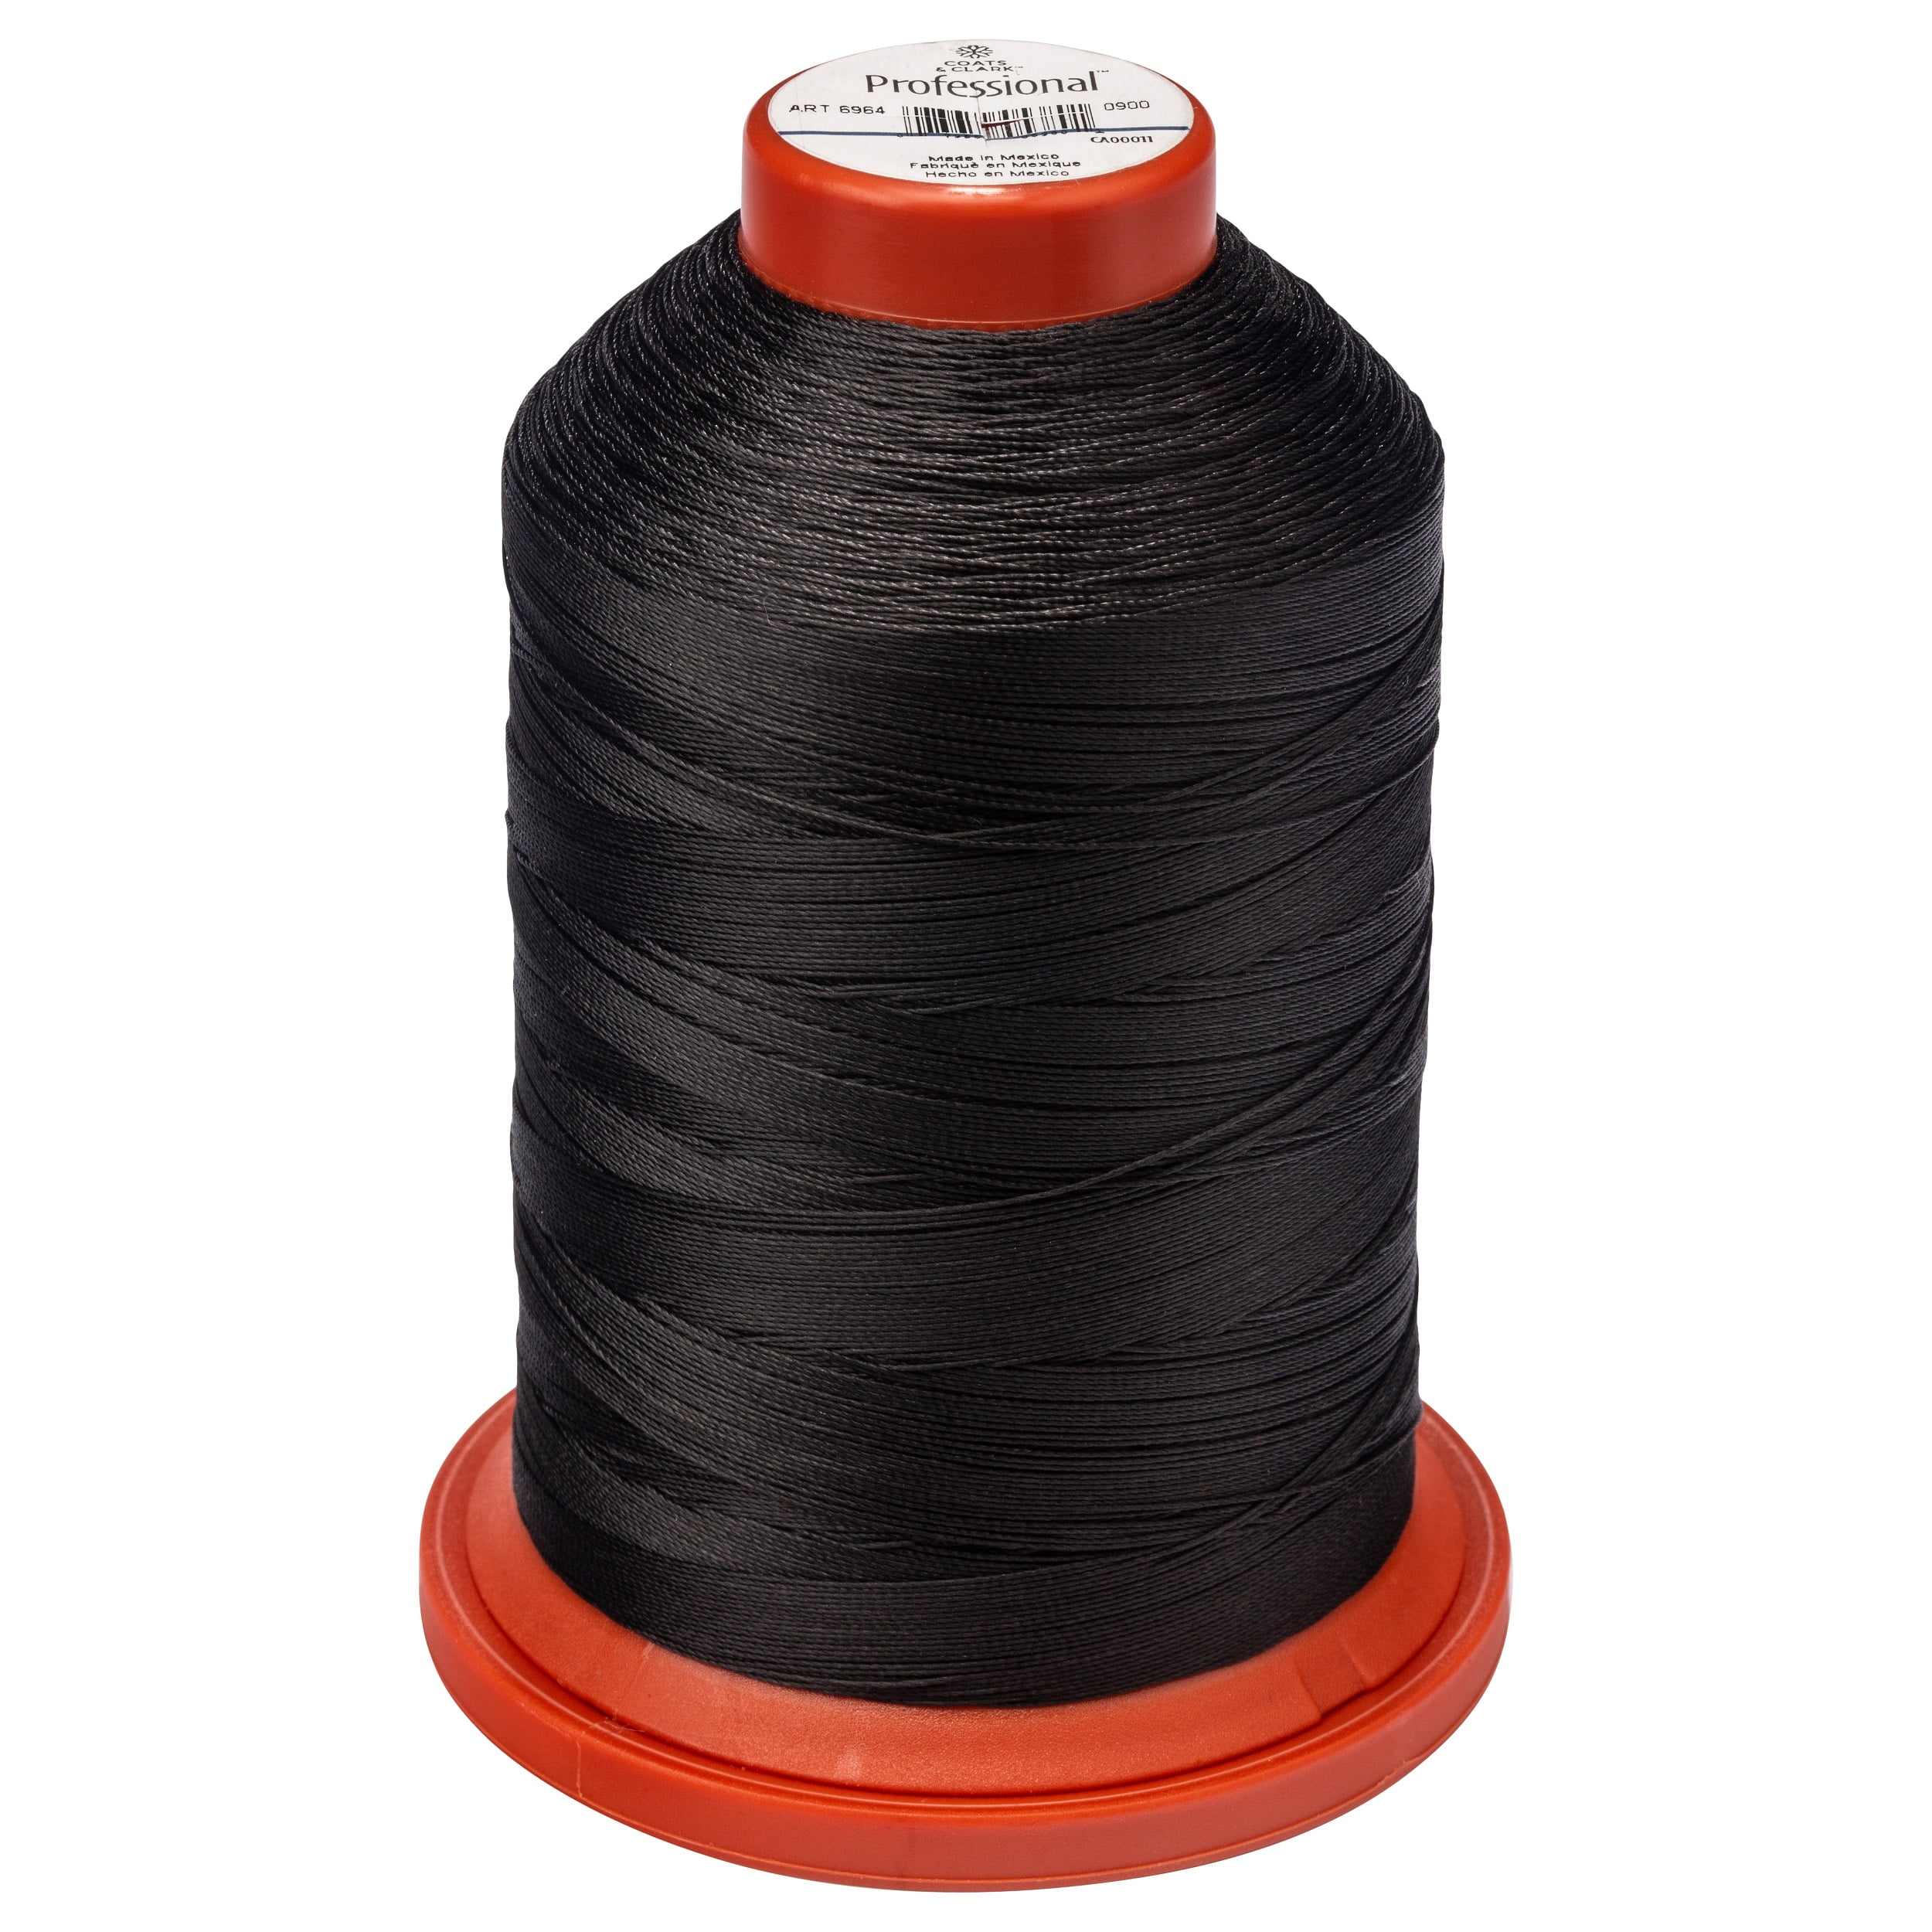 Coats & Clark Extra Strong Upholstery Thread, 150 Yds, S964, Black Bundle  with B